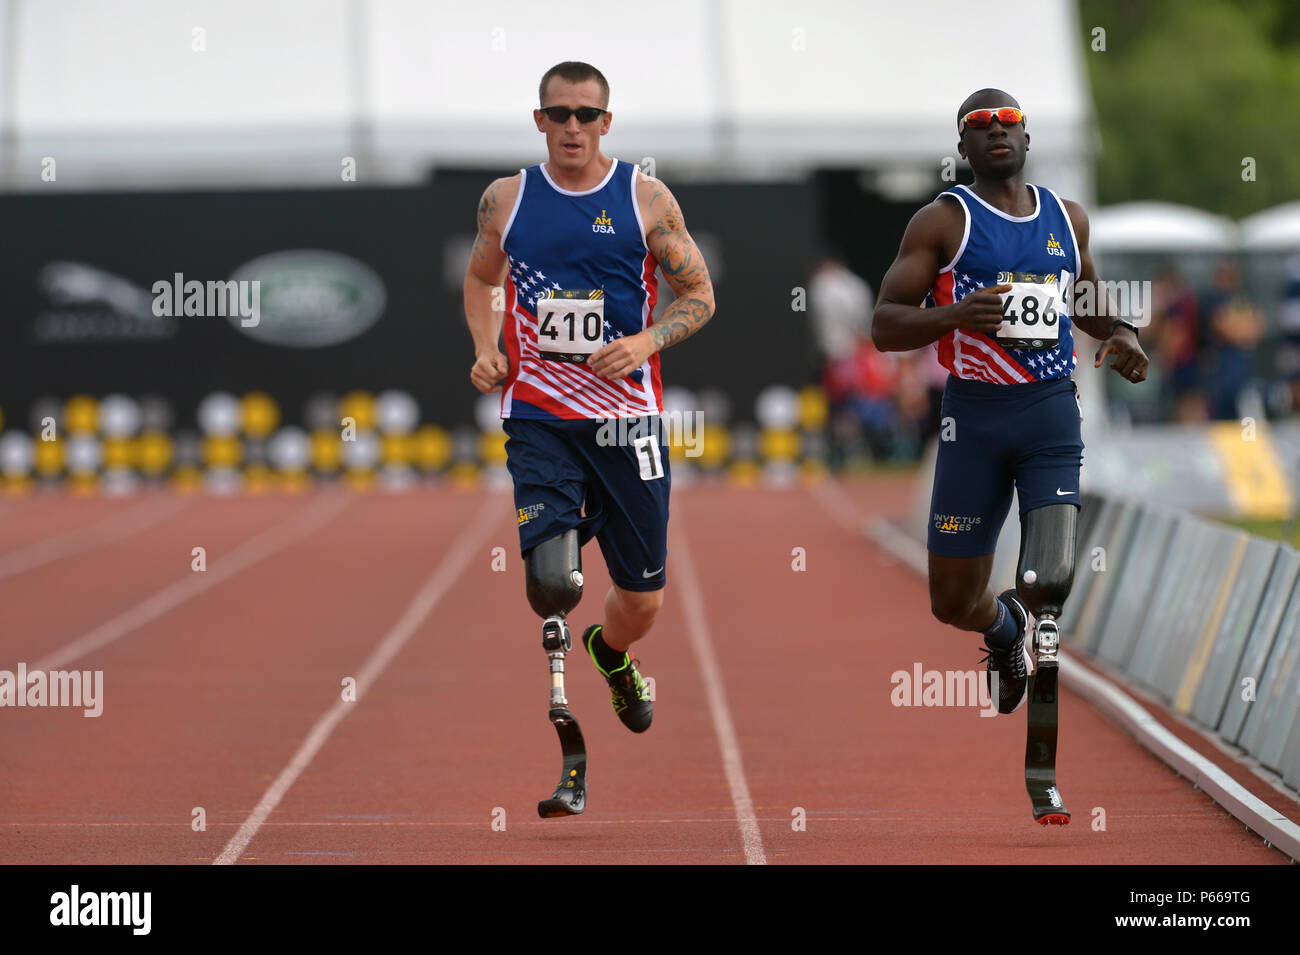 Allan Armstrong, left, and William Reynolds of team US run during the 100  meter men's track at the 2016 Invictus Games at the ESPN Wide World of  Sports Complex, Orlando, Fla., May